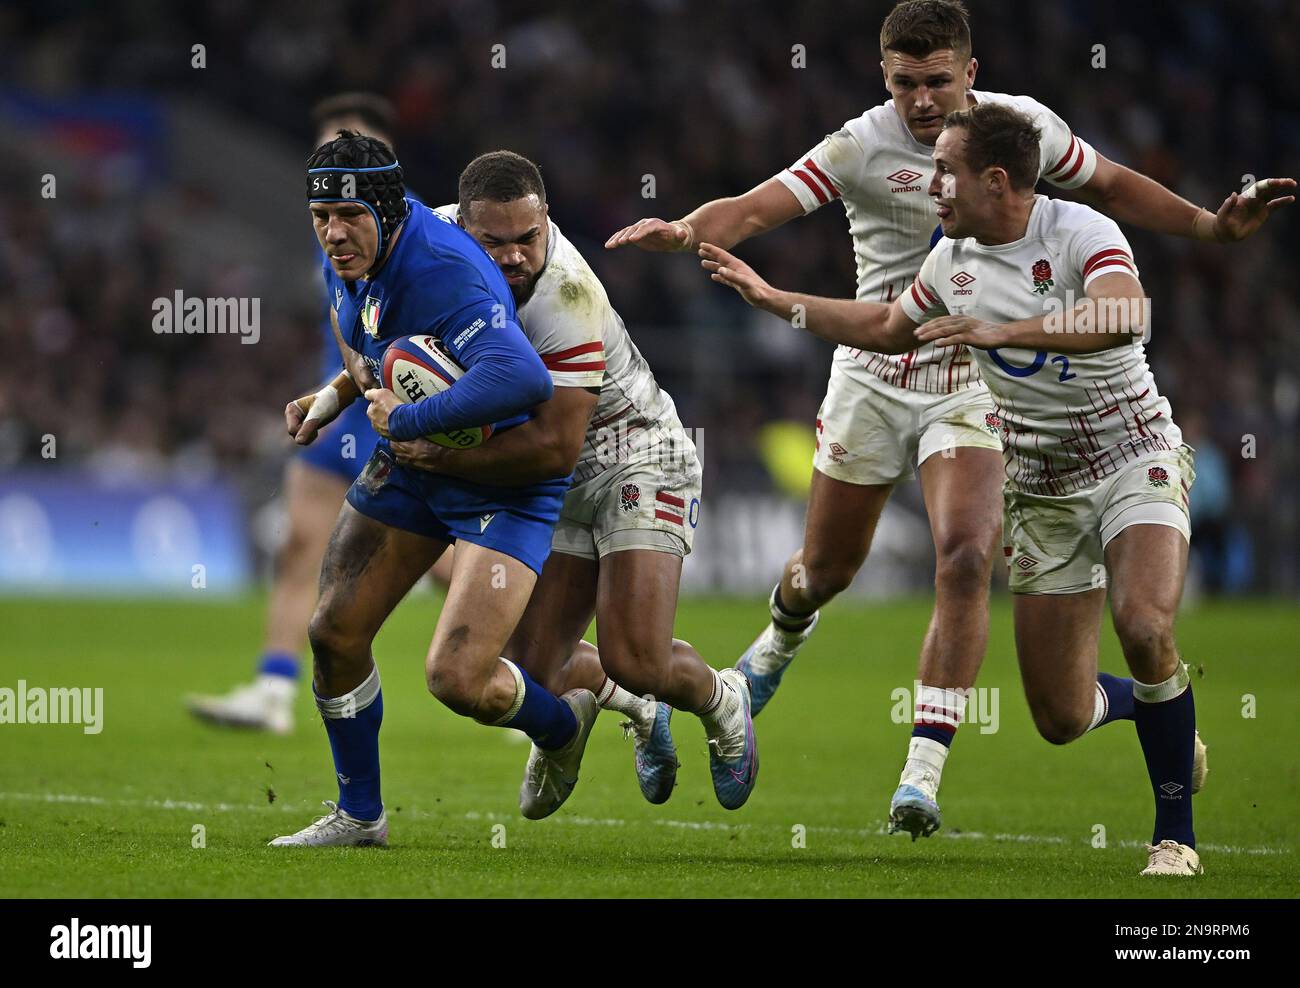 Twickenham, United Kingdom. 12th Feb, 2023. England V Italy, Guinness 6 Nations. Twickenham Stadium. Twickenham. Juan Ignacio Brex (Italy) is tackled by Ollie Lawrence (England) during the England V Italy rugby match in round 2 of the Guinness 6 Nations. Credit: Sport In Pictures/Alamy Live News Stock Photo